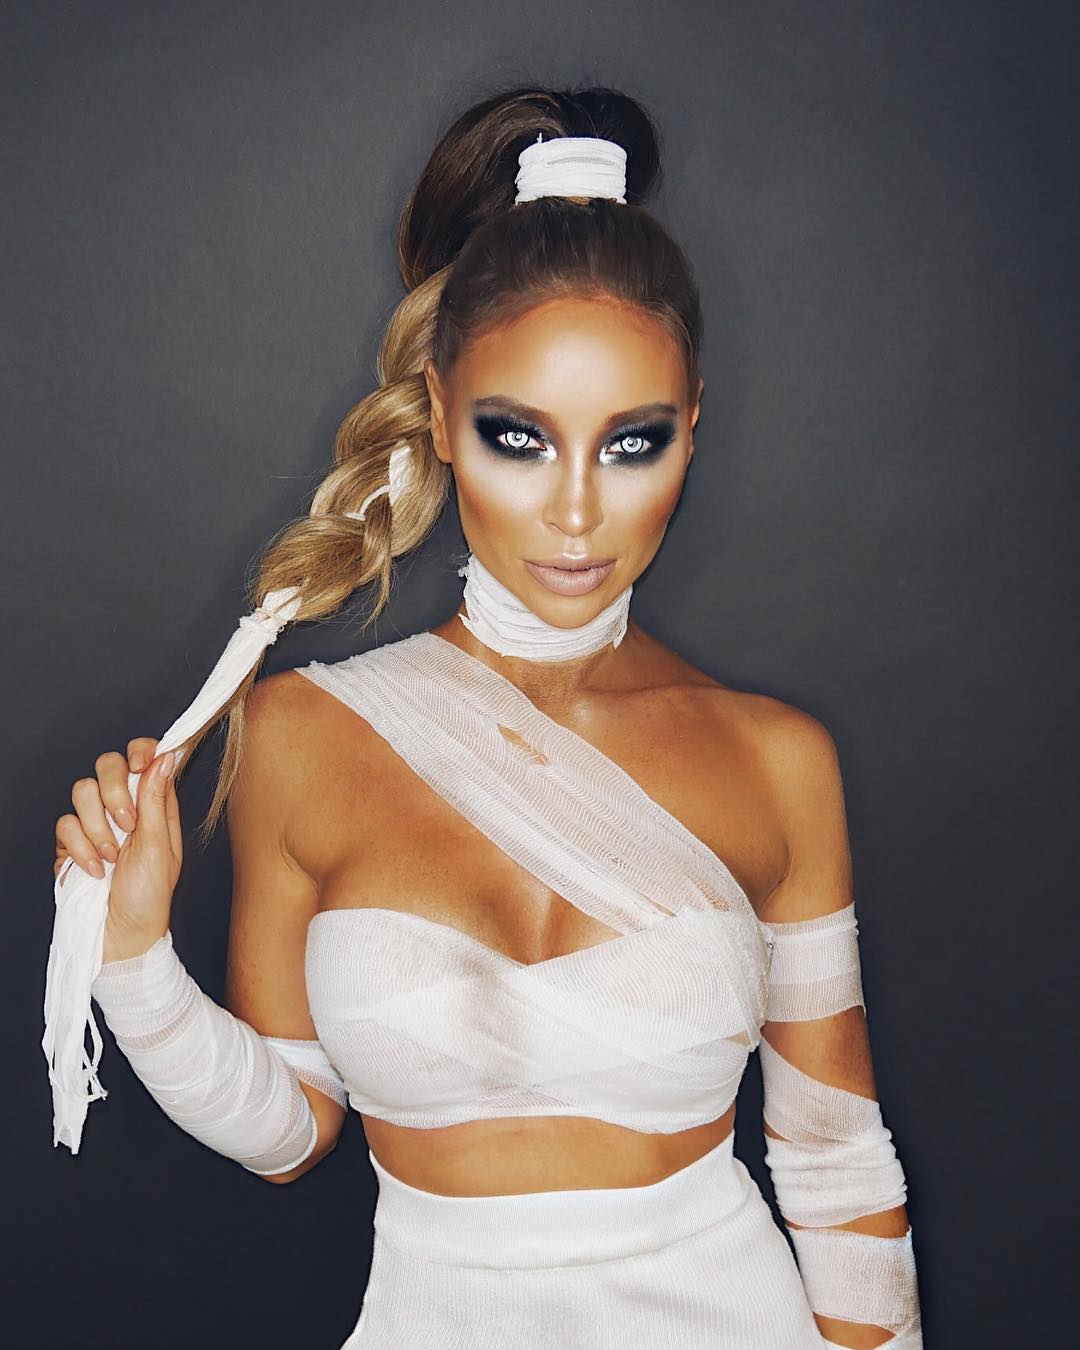 49 Hot Pictures Of Lauren Pope Will Drive You Nuts For Her | Best Of Comic Books